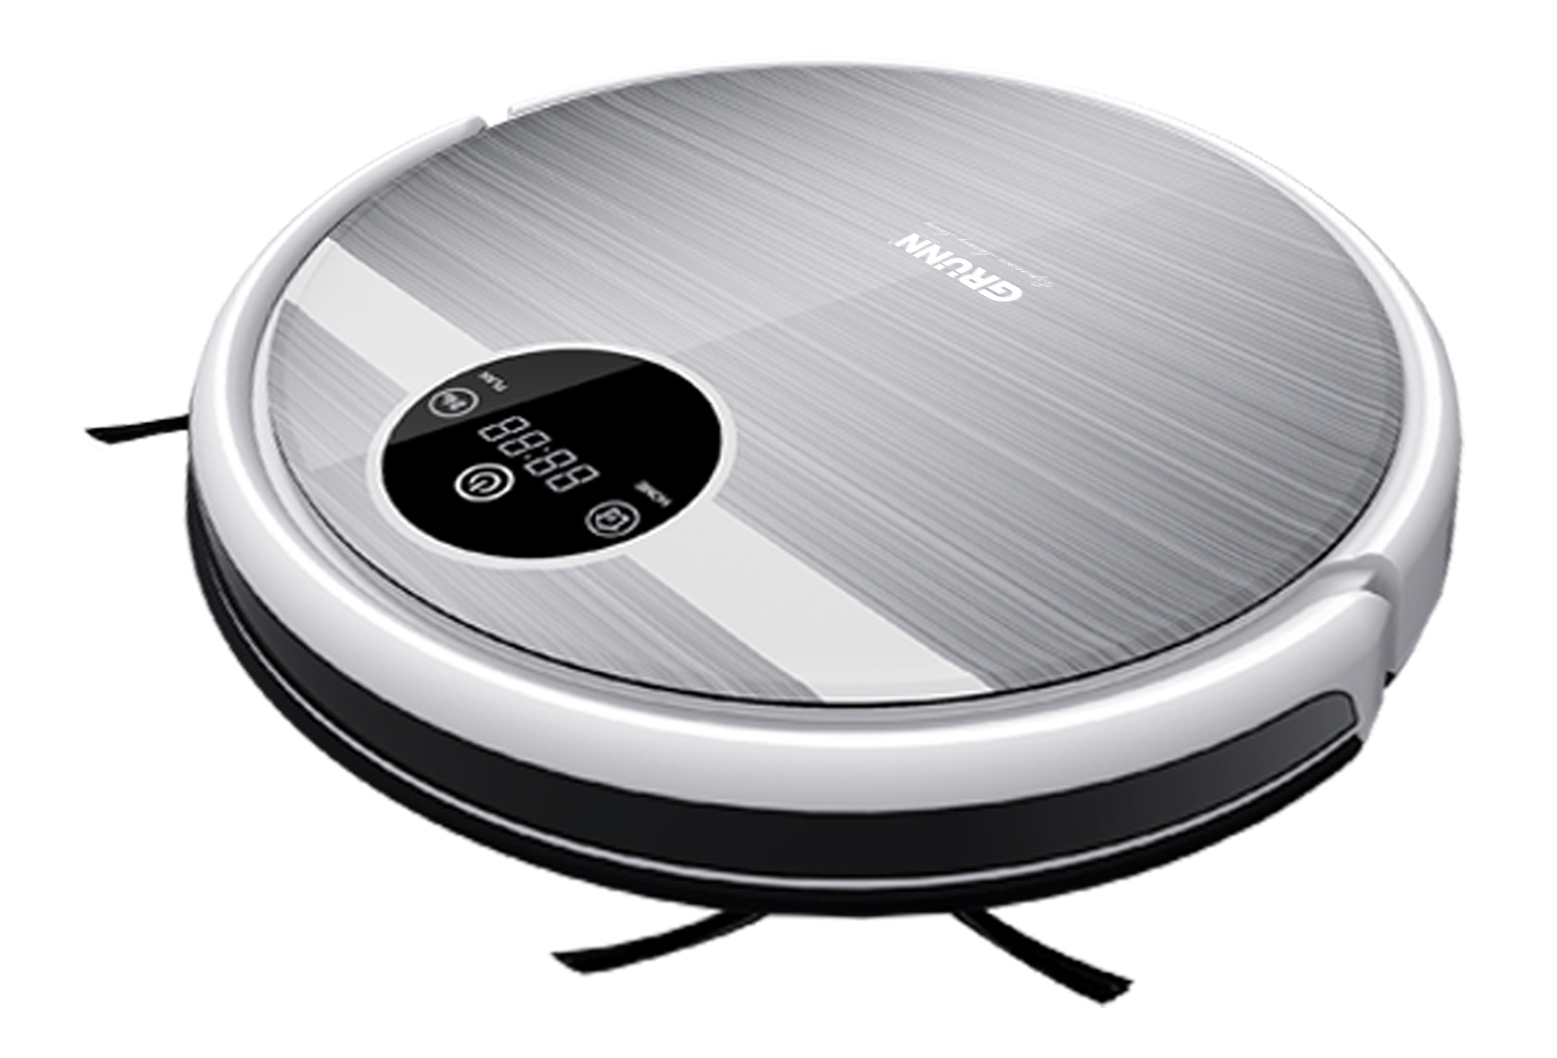 7 Best Robot Vacuum Cleaners In Singapore For To Mop & Vacuum Less